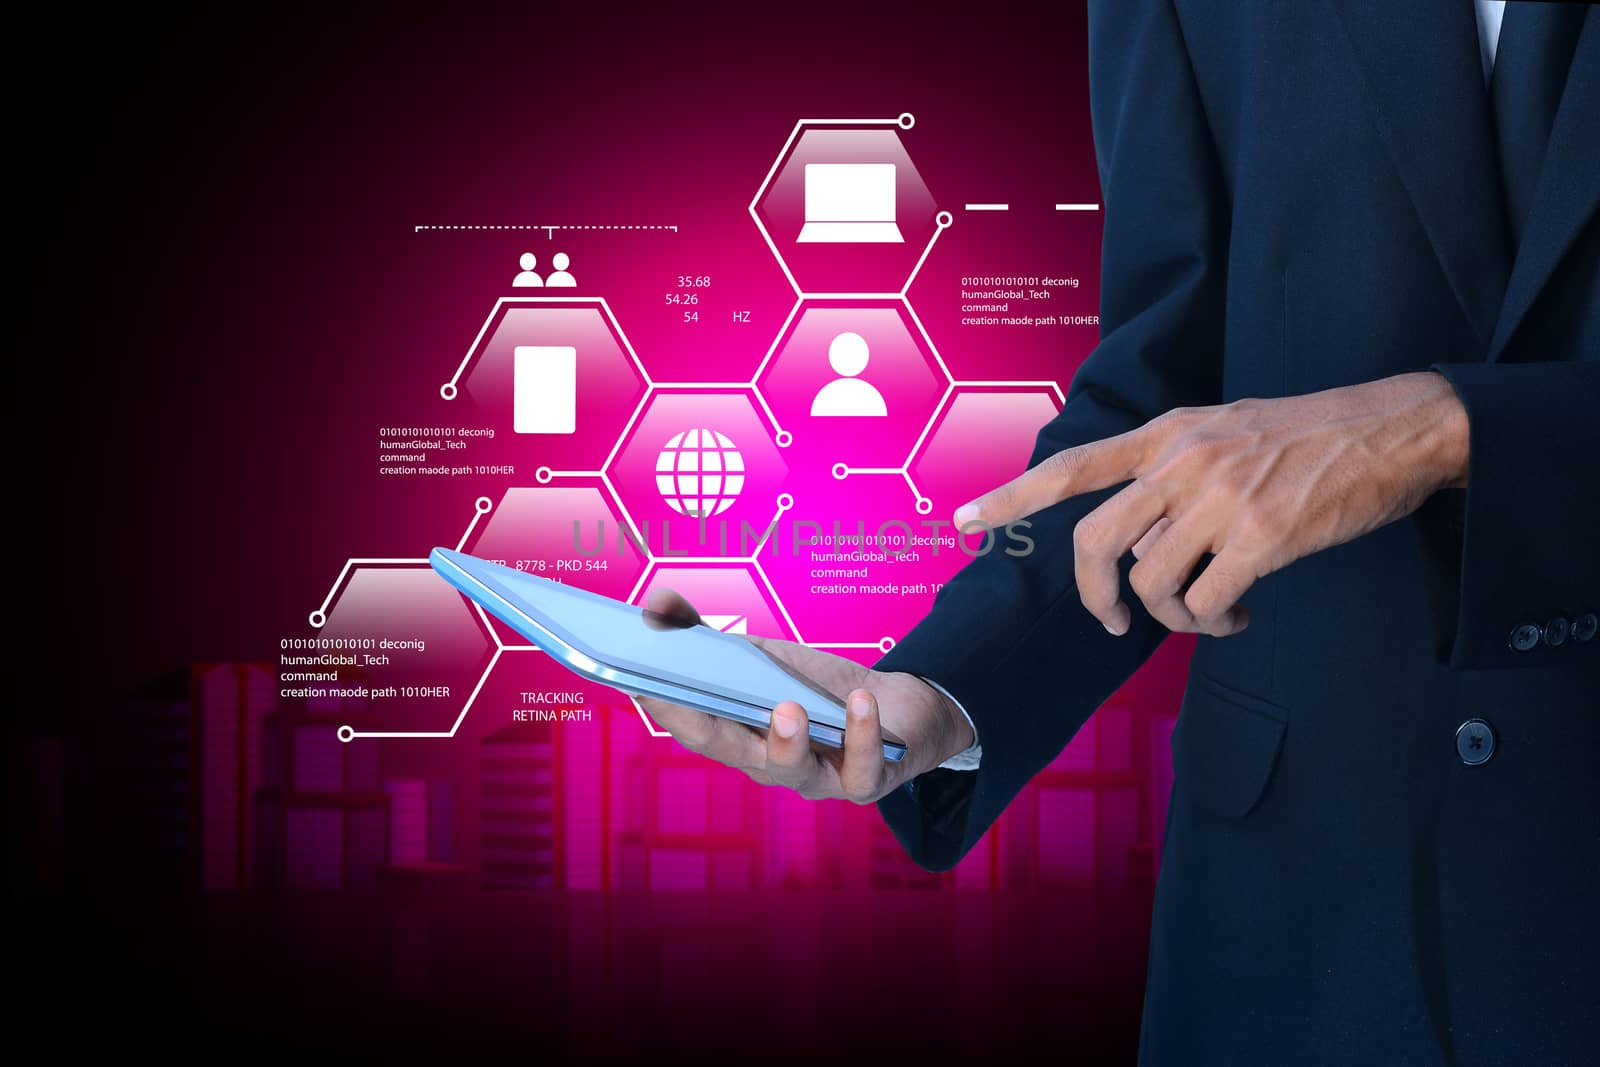 Man showing networking on mobile phone in color background